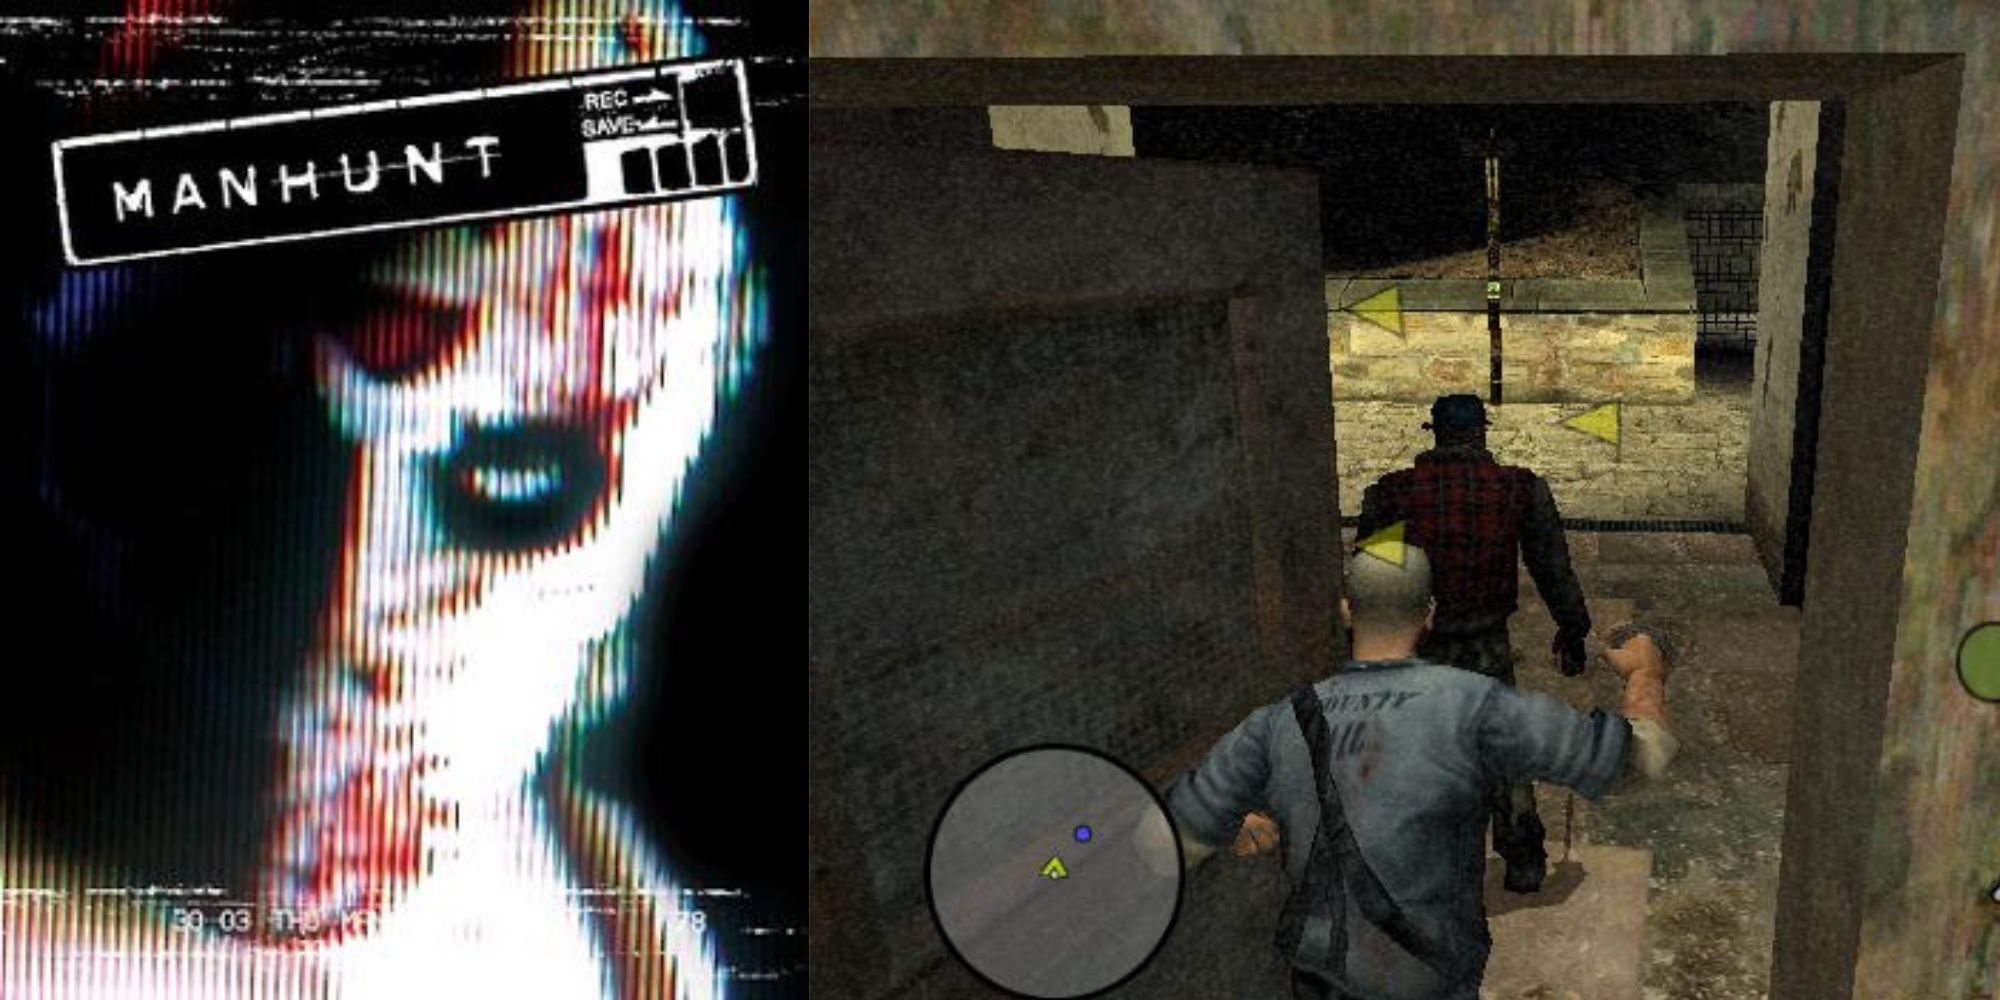 Manhunt cover art with in-game image of player creeping behind enemy